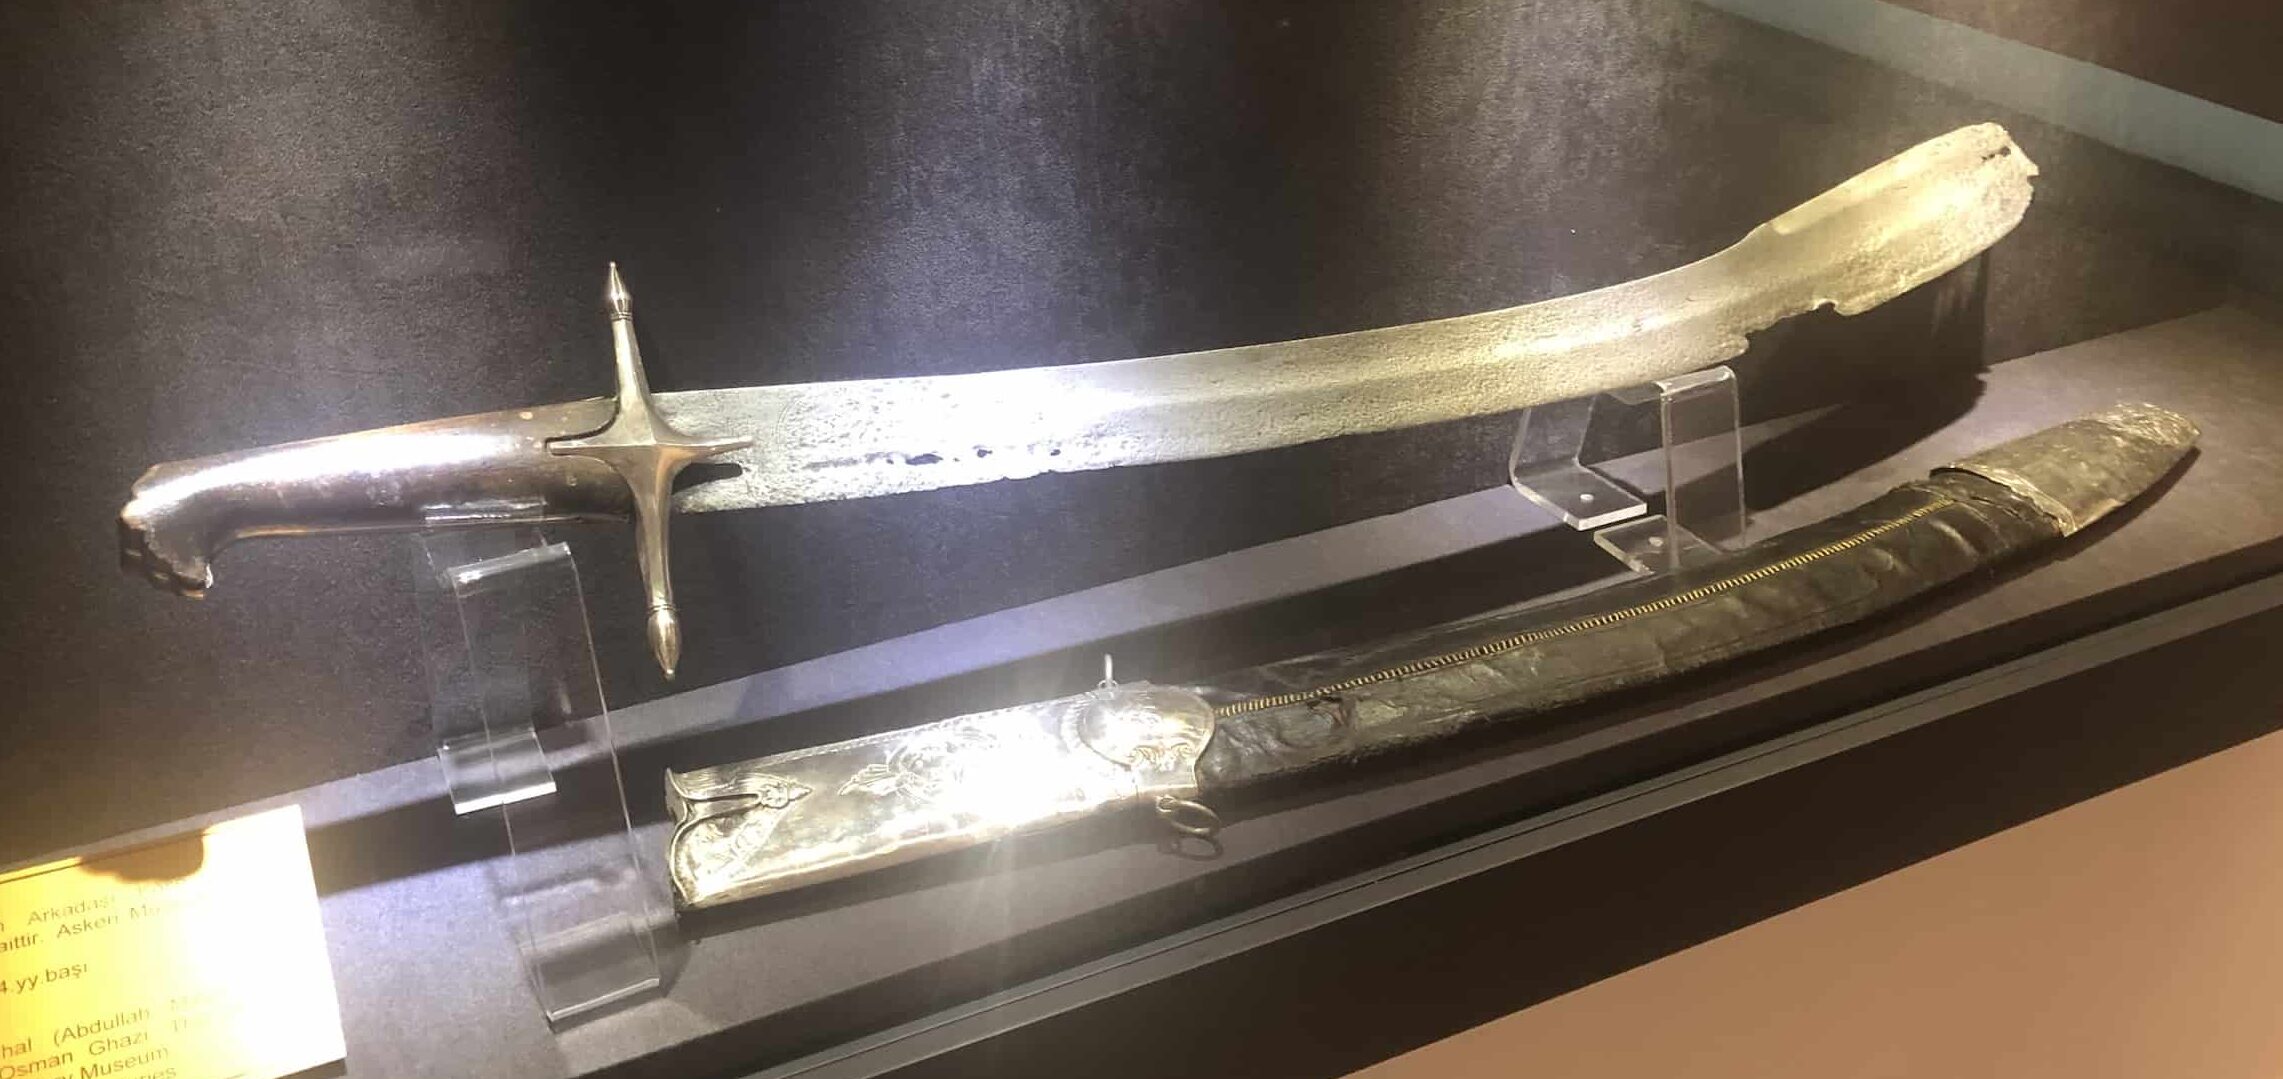 Sword belonging to Köse Mihal in the Ottoman State Establishment Hall at the Harbiye Military Museum in Istanbul, Turkey